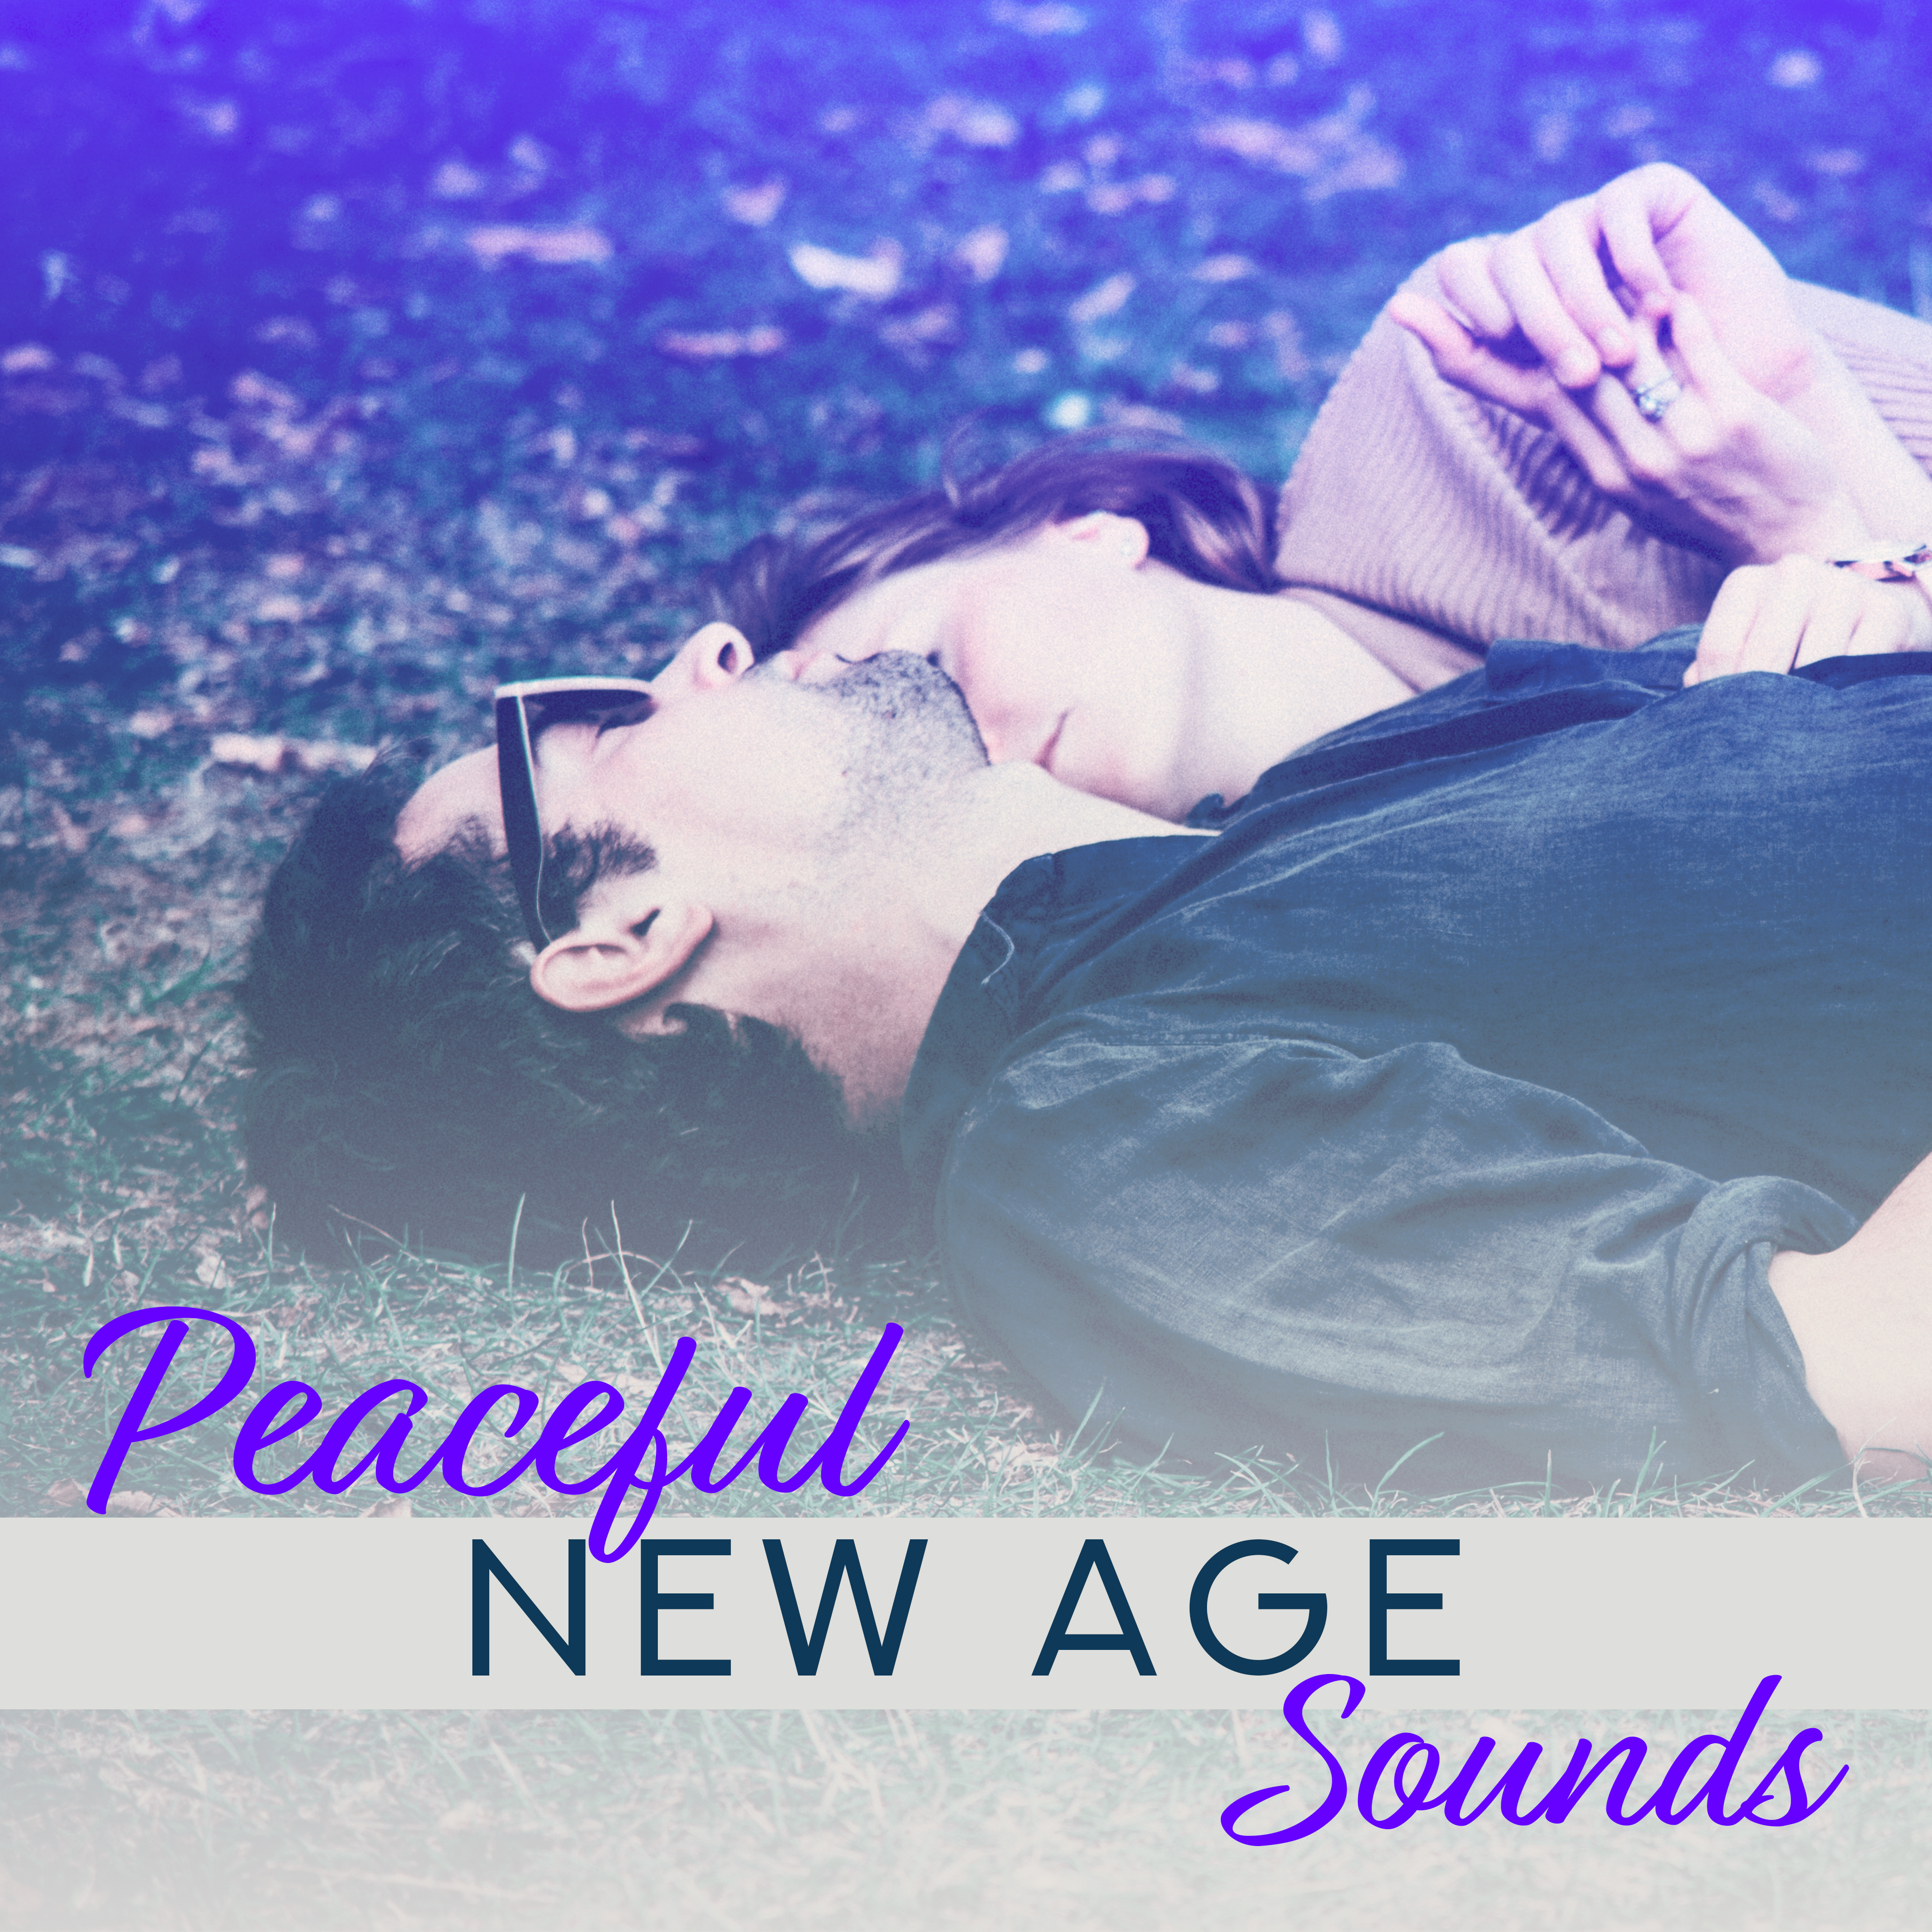 Peaceful New Age Sounds – Relax with New Age Songs, Music to Relieve Stress, Healing Therapy Sounds, Melodies to Calm Down